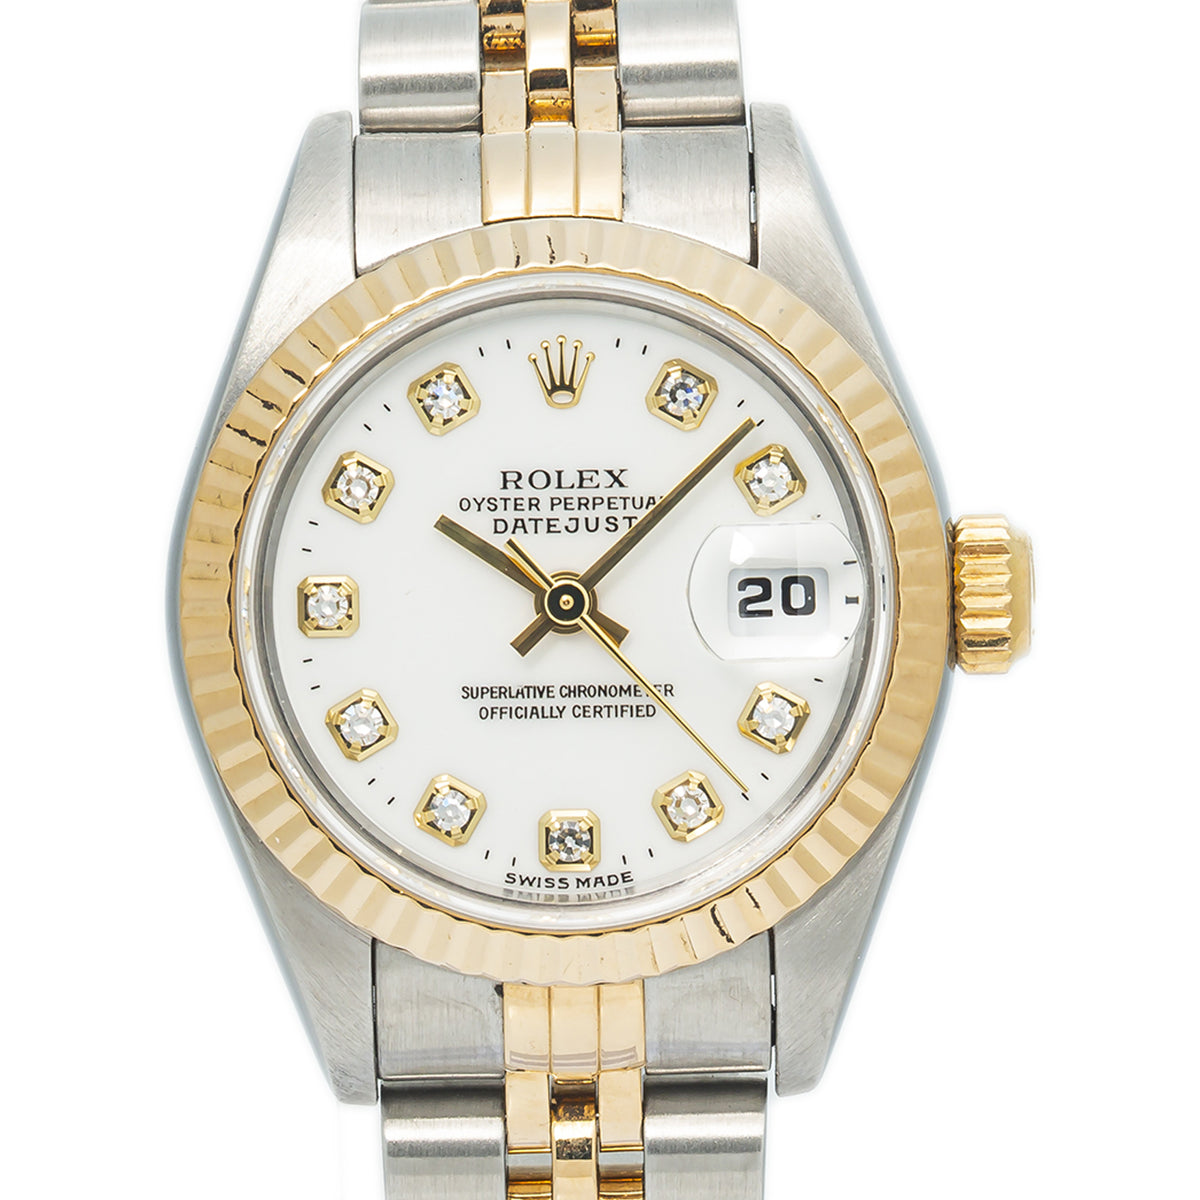 Rolex Datejust 69173 Yellow Gold Jubilee White Factory Diamonds Dial Watch 26mm